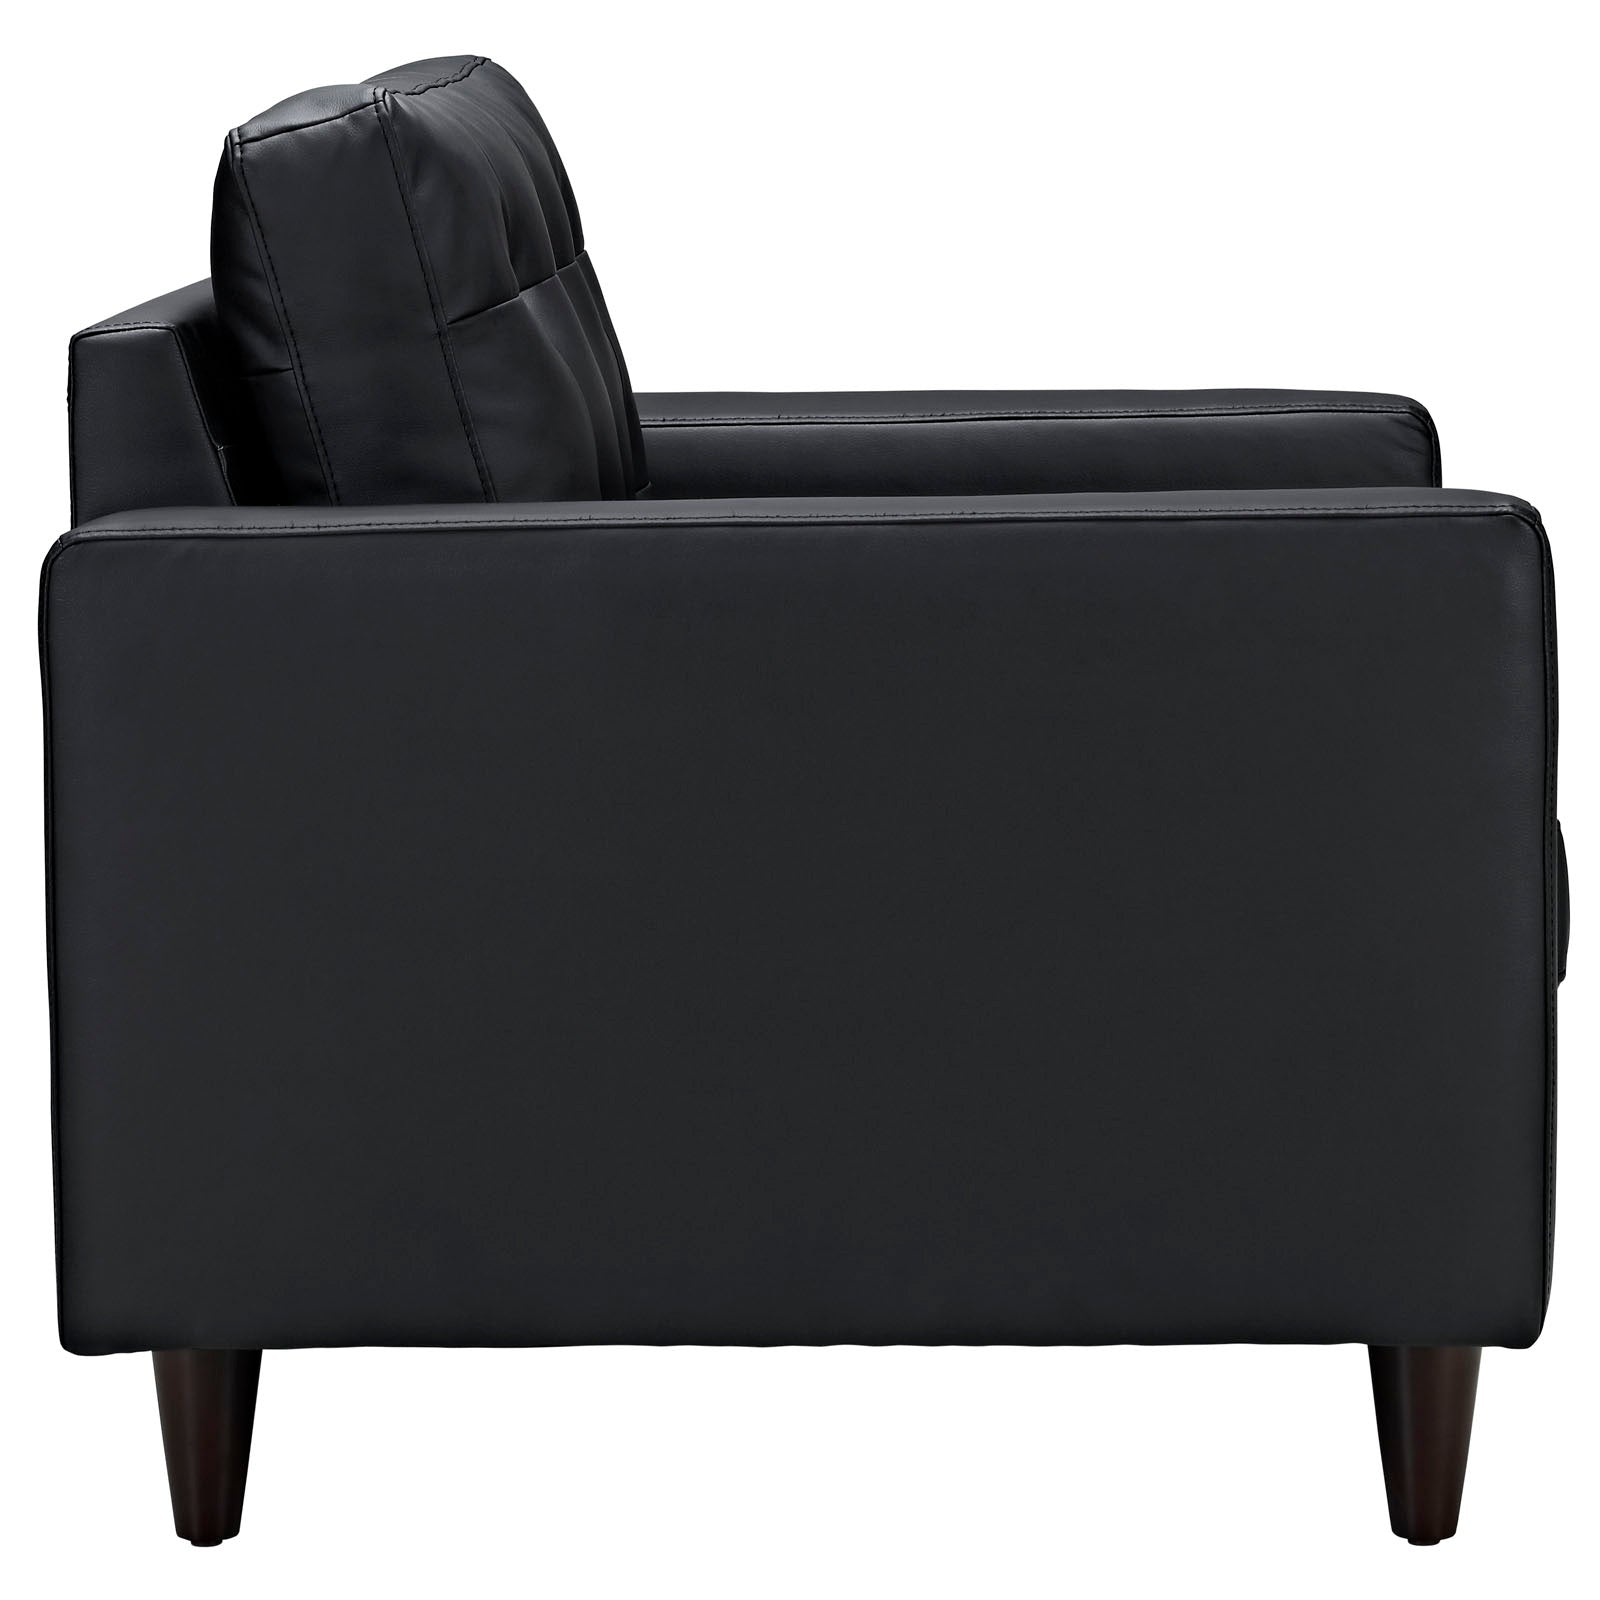 Modway Living Room Sets - Empress Sofa and Armchairs Set of 3 Black